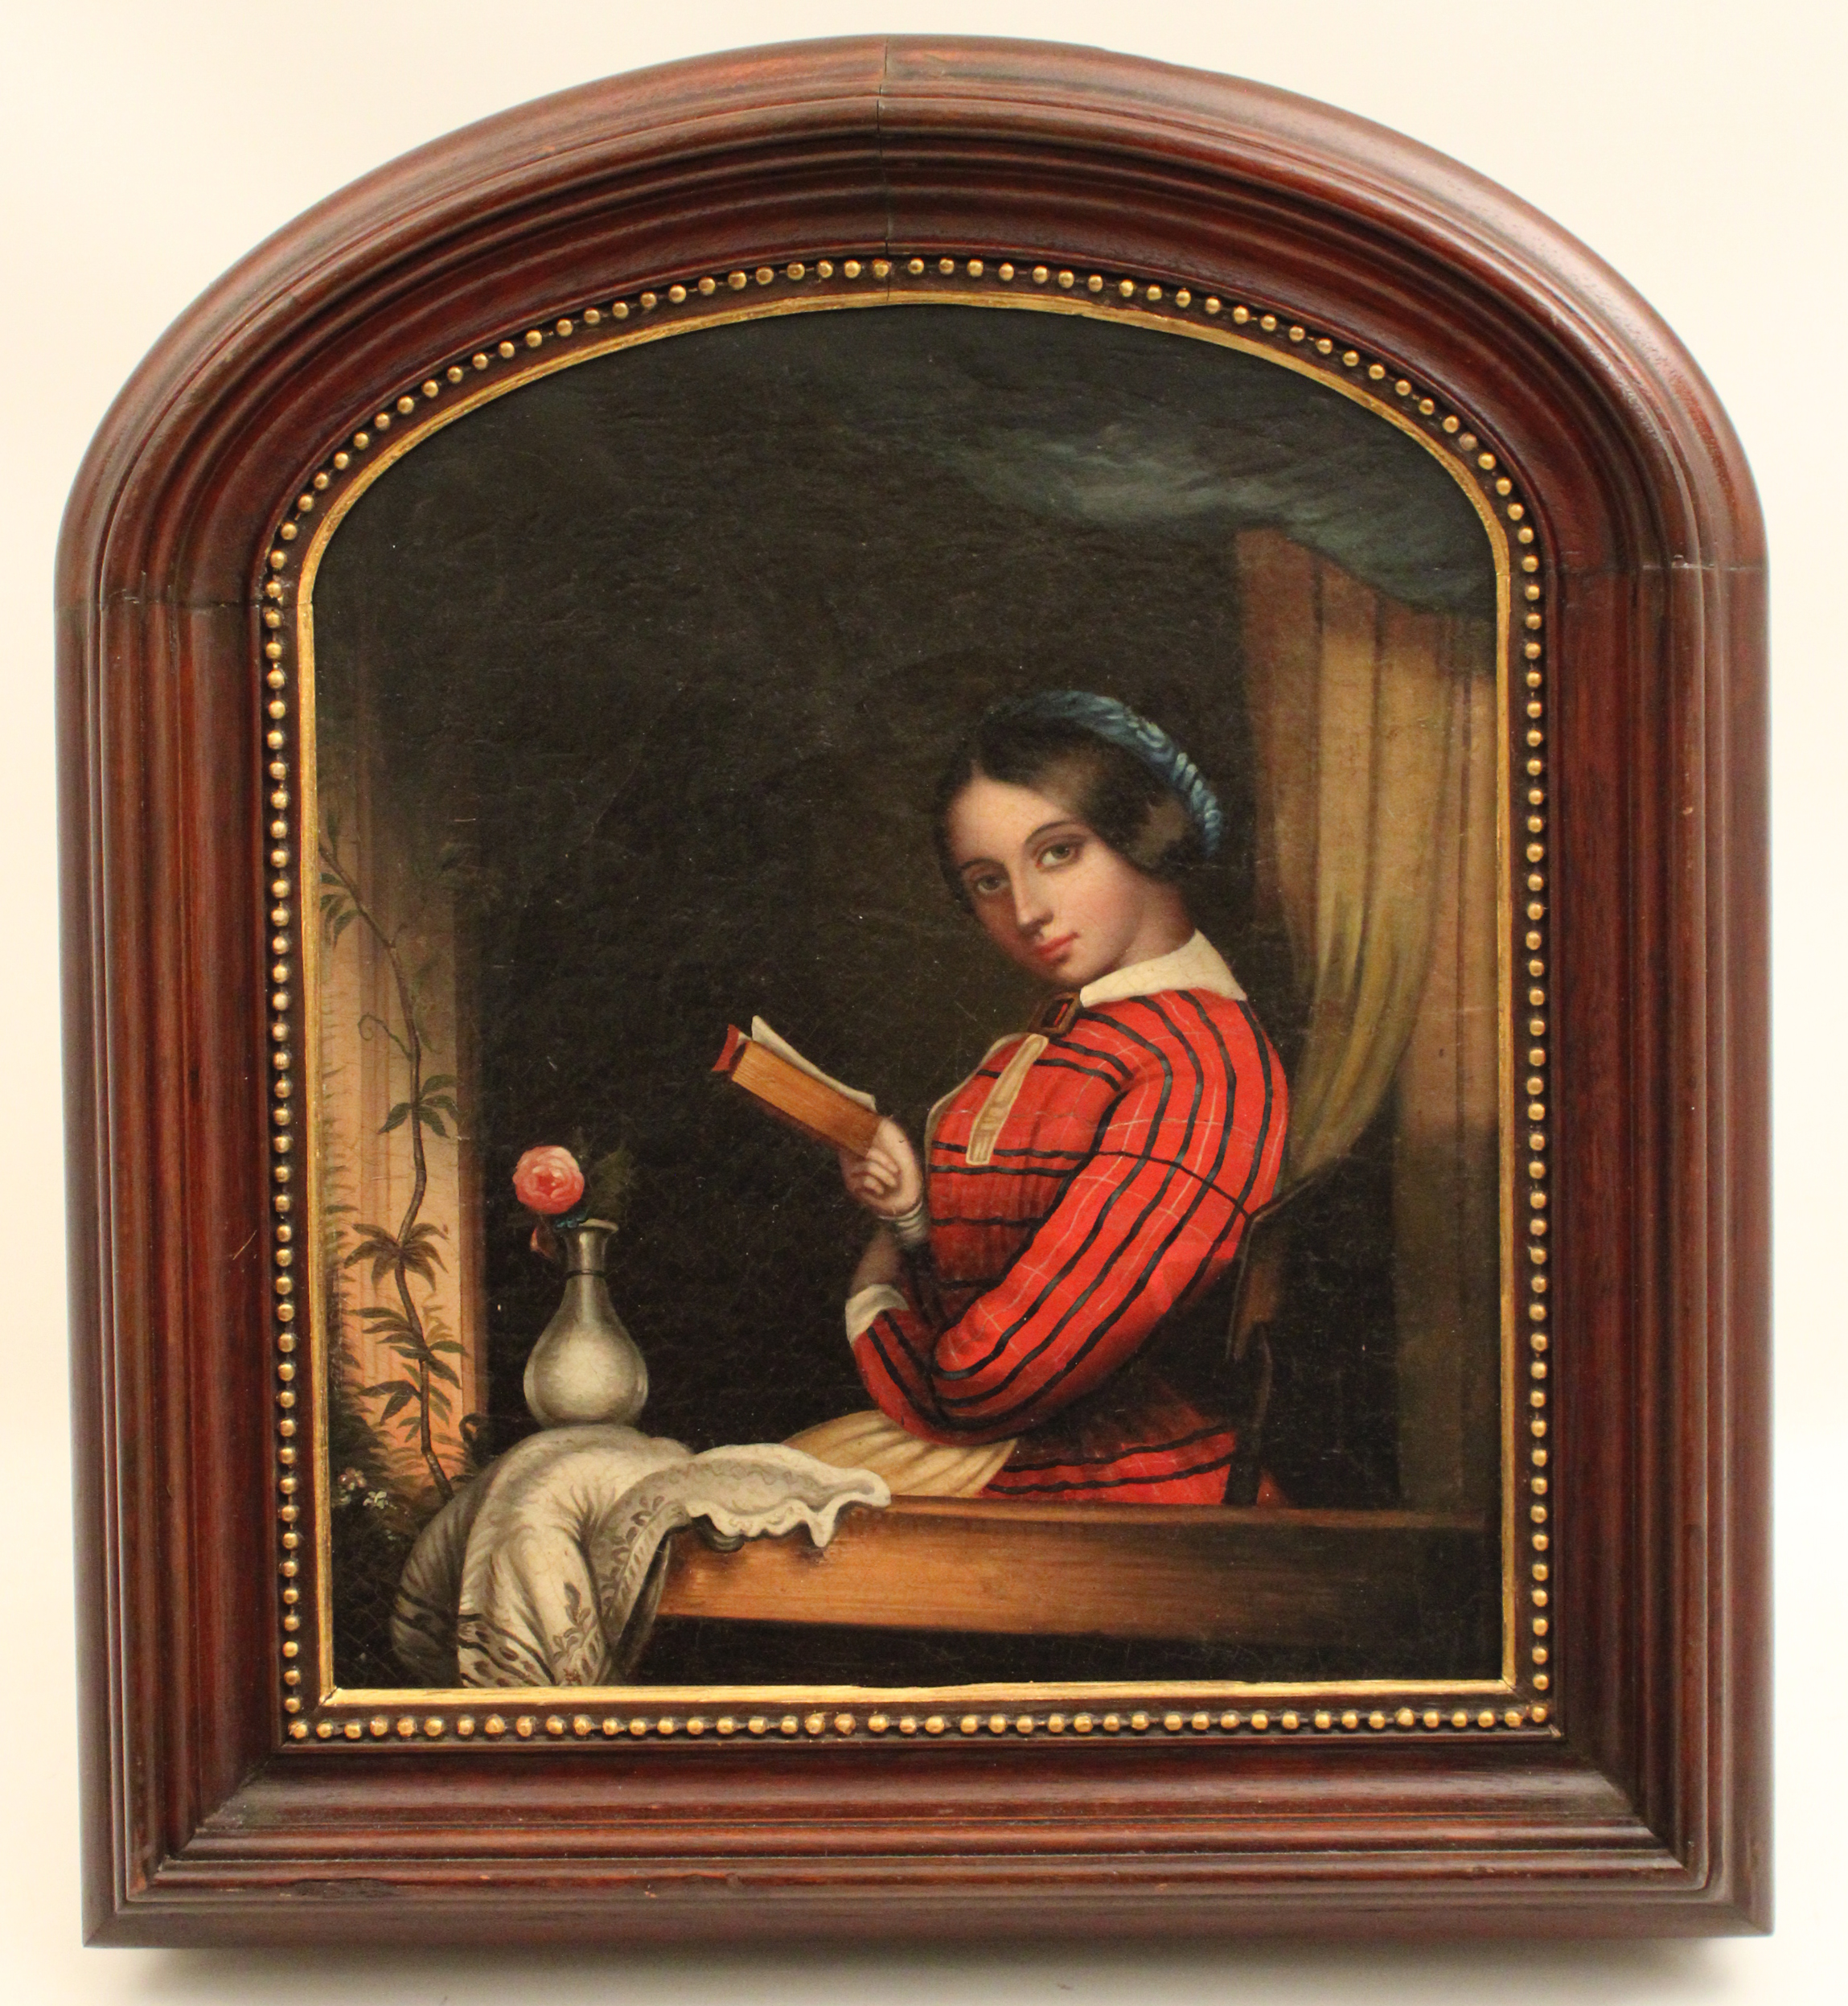 ZUBES BUHLER, 19TH C. O/C PAINTING